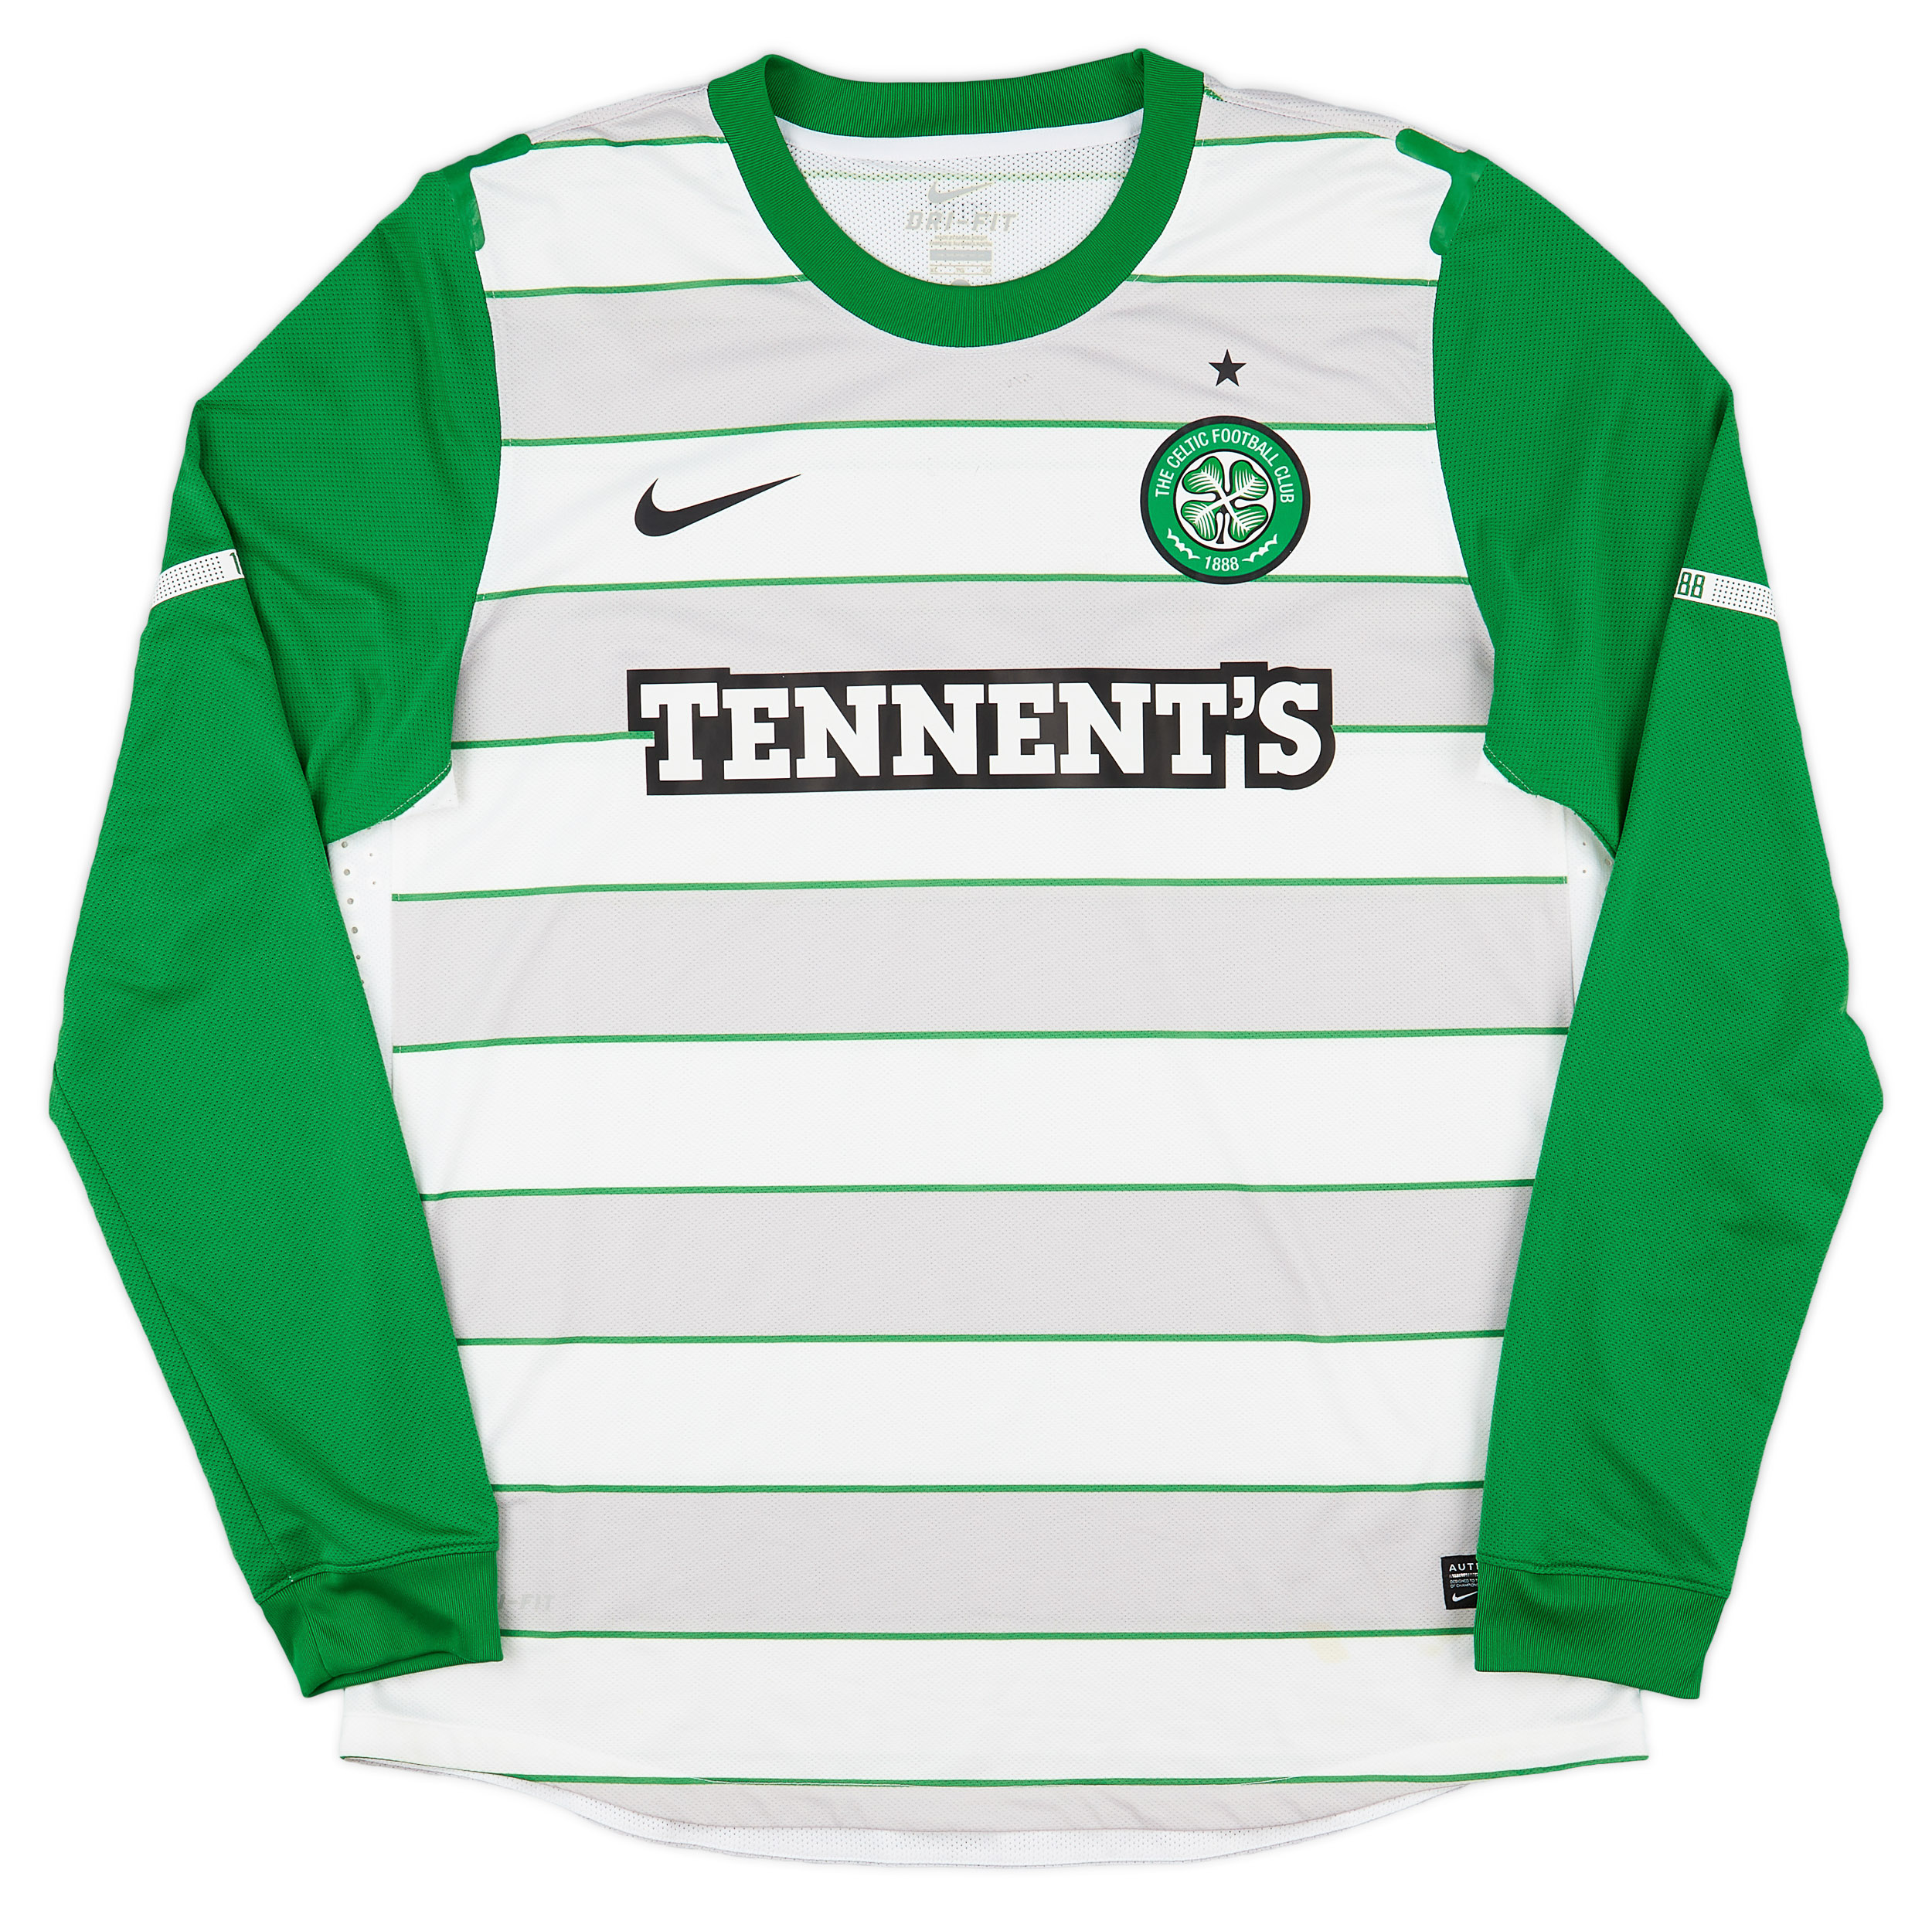 2011-12 Celtic Player Issue Away Shirt - 7/10 - ()